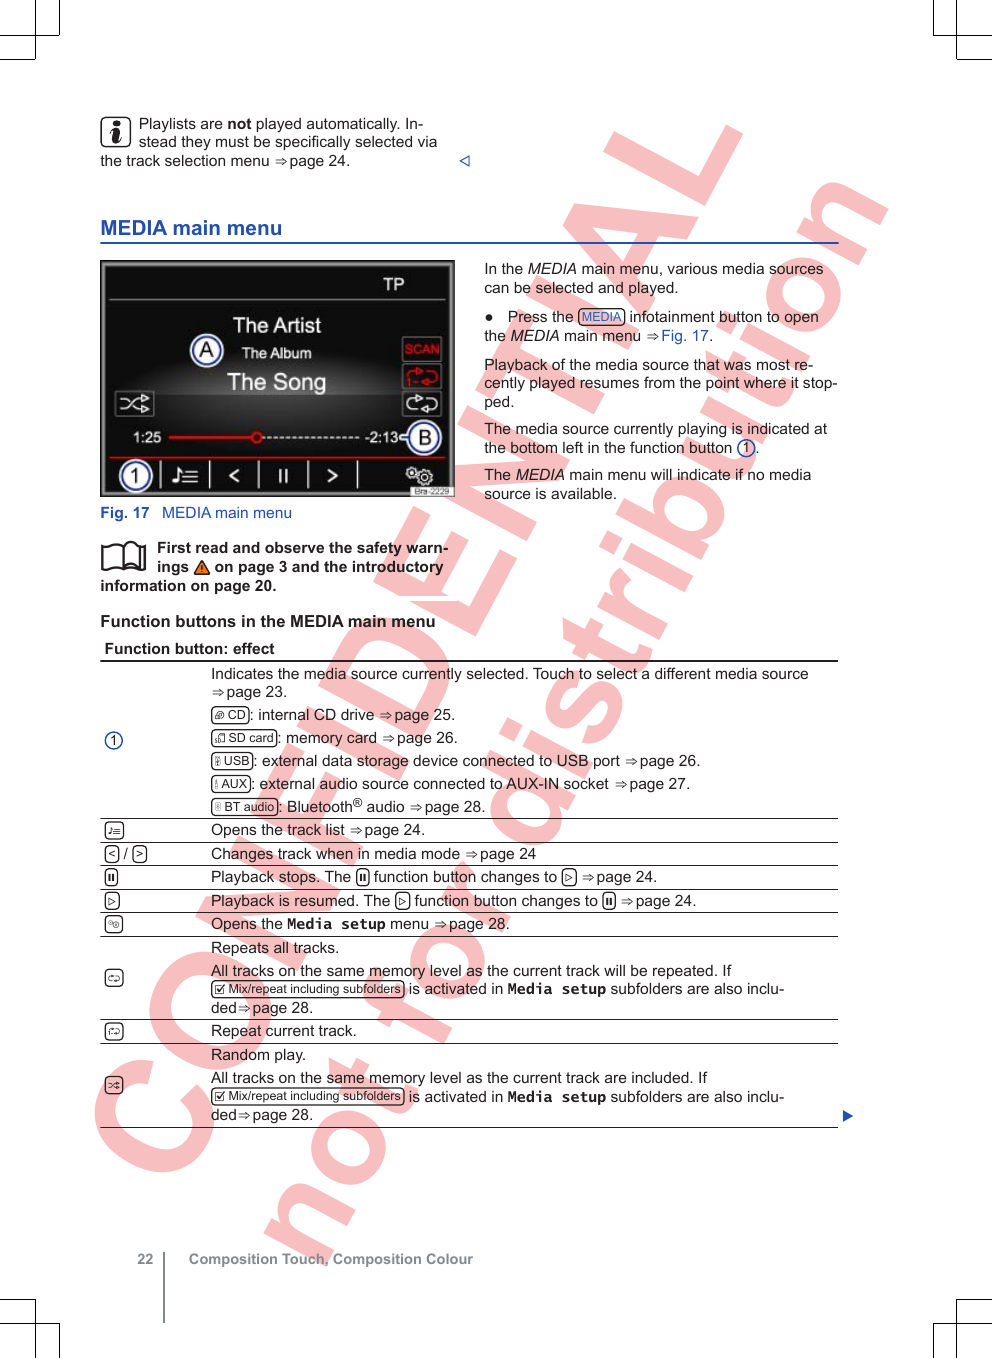  CONFIDENTIAL not for distribution Playlists are not played automatically. In-stead they must be specifically selected viathe track selection menu ⇒ page 24. MEDIA main menuFig. 17  MEDIA main menuFirst read and observe the safety warn-ings   on page 3 and the introductoryinformation on page 20.In the MEDIA main menu, various media sourcescan be selected and played.● Press the  MEDIA  infotainment button to openthe MEDIA main menu ⇒ Fig. 17.Playback of the media source that was most re-cently played resumes from the point where it stop-ped.The media source currently playing is indicated atthe bottom left in the function button  1.The MEDIA main menu will indicate if no mediasource is available.Function buttons in the MEDIA main menuFunction button: effect1Indicates the media source currently selected. Touch to select a different media source⇒ page 23. CD : internal CD drive ⇒ page 25. SD card : memory card ⇒ page 26. USB : external data storage device connected to USB port ⇒ page 26. AUX : external audio source connected to AUX-IN socket ⇒ page 27. BT audio : Bluetooth® audio ⇒ page 28.Opens the track list ⇒ page 24.&lt; /  &gt;Changes track when in media mode ⇒ page 24Playback stops. The   function button changes to   ⇒ page 24.Playback is resumed. The   function button changes to   ⇒ page 24.Opens the Media setup menu ⇒ page 28.Repeats all tracks.All tracks on the same memory level as the current track will be repeated. If Mix/repeat including subfolders  is activated in Media setup subfolders are also inclu-ded⇒ page 28.Repeat current track.Random play.All tracks on the same memory level as the current track are included. If Mix/repeat including subfolders  is activated in Media setup subfolders are also inclu-ded⇒ page 28. Composition Touch, Composition Colour22